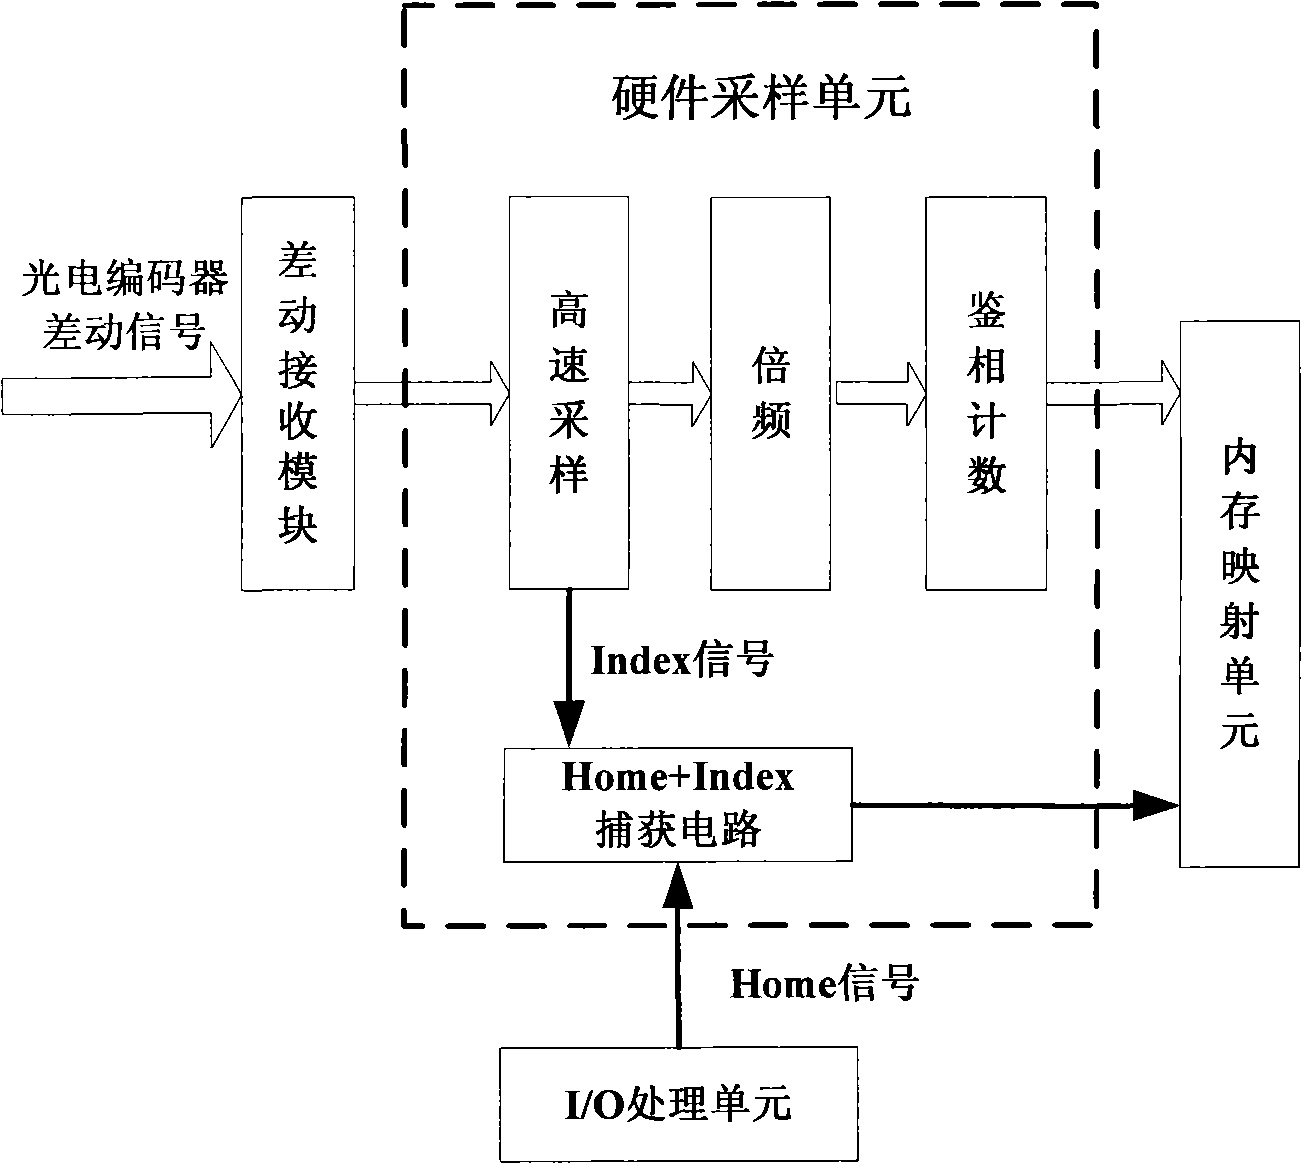 Programmable multi-axis controller based on IEEE-1394 serial bus